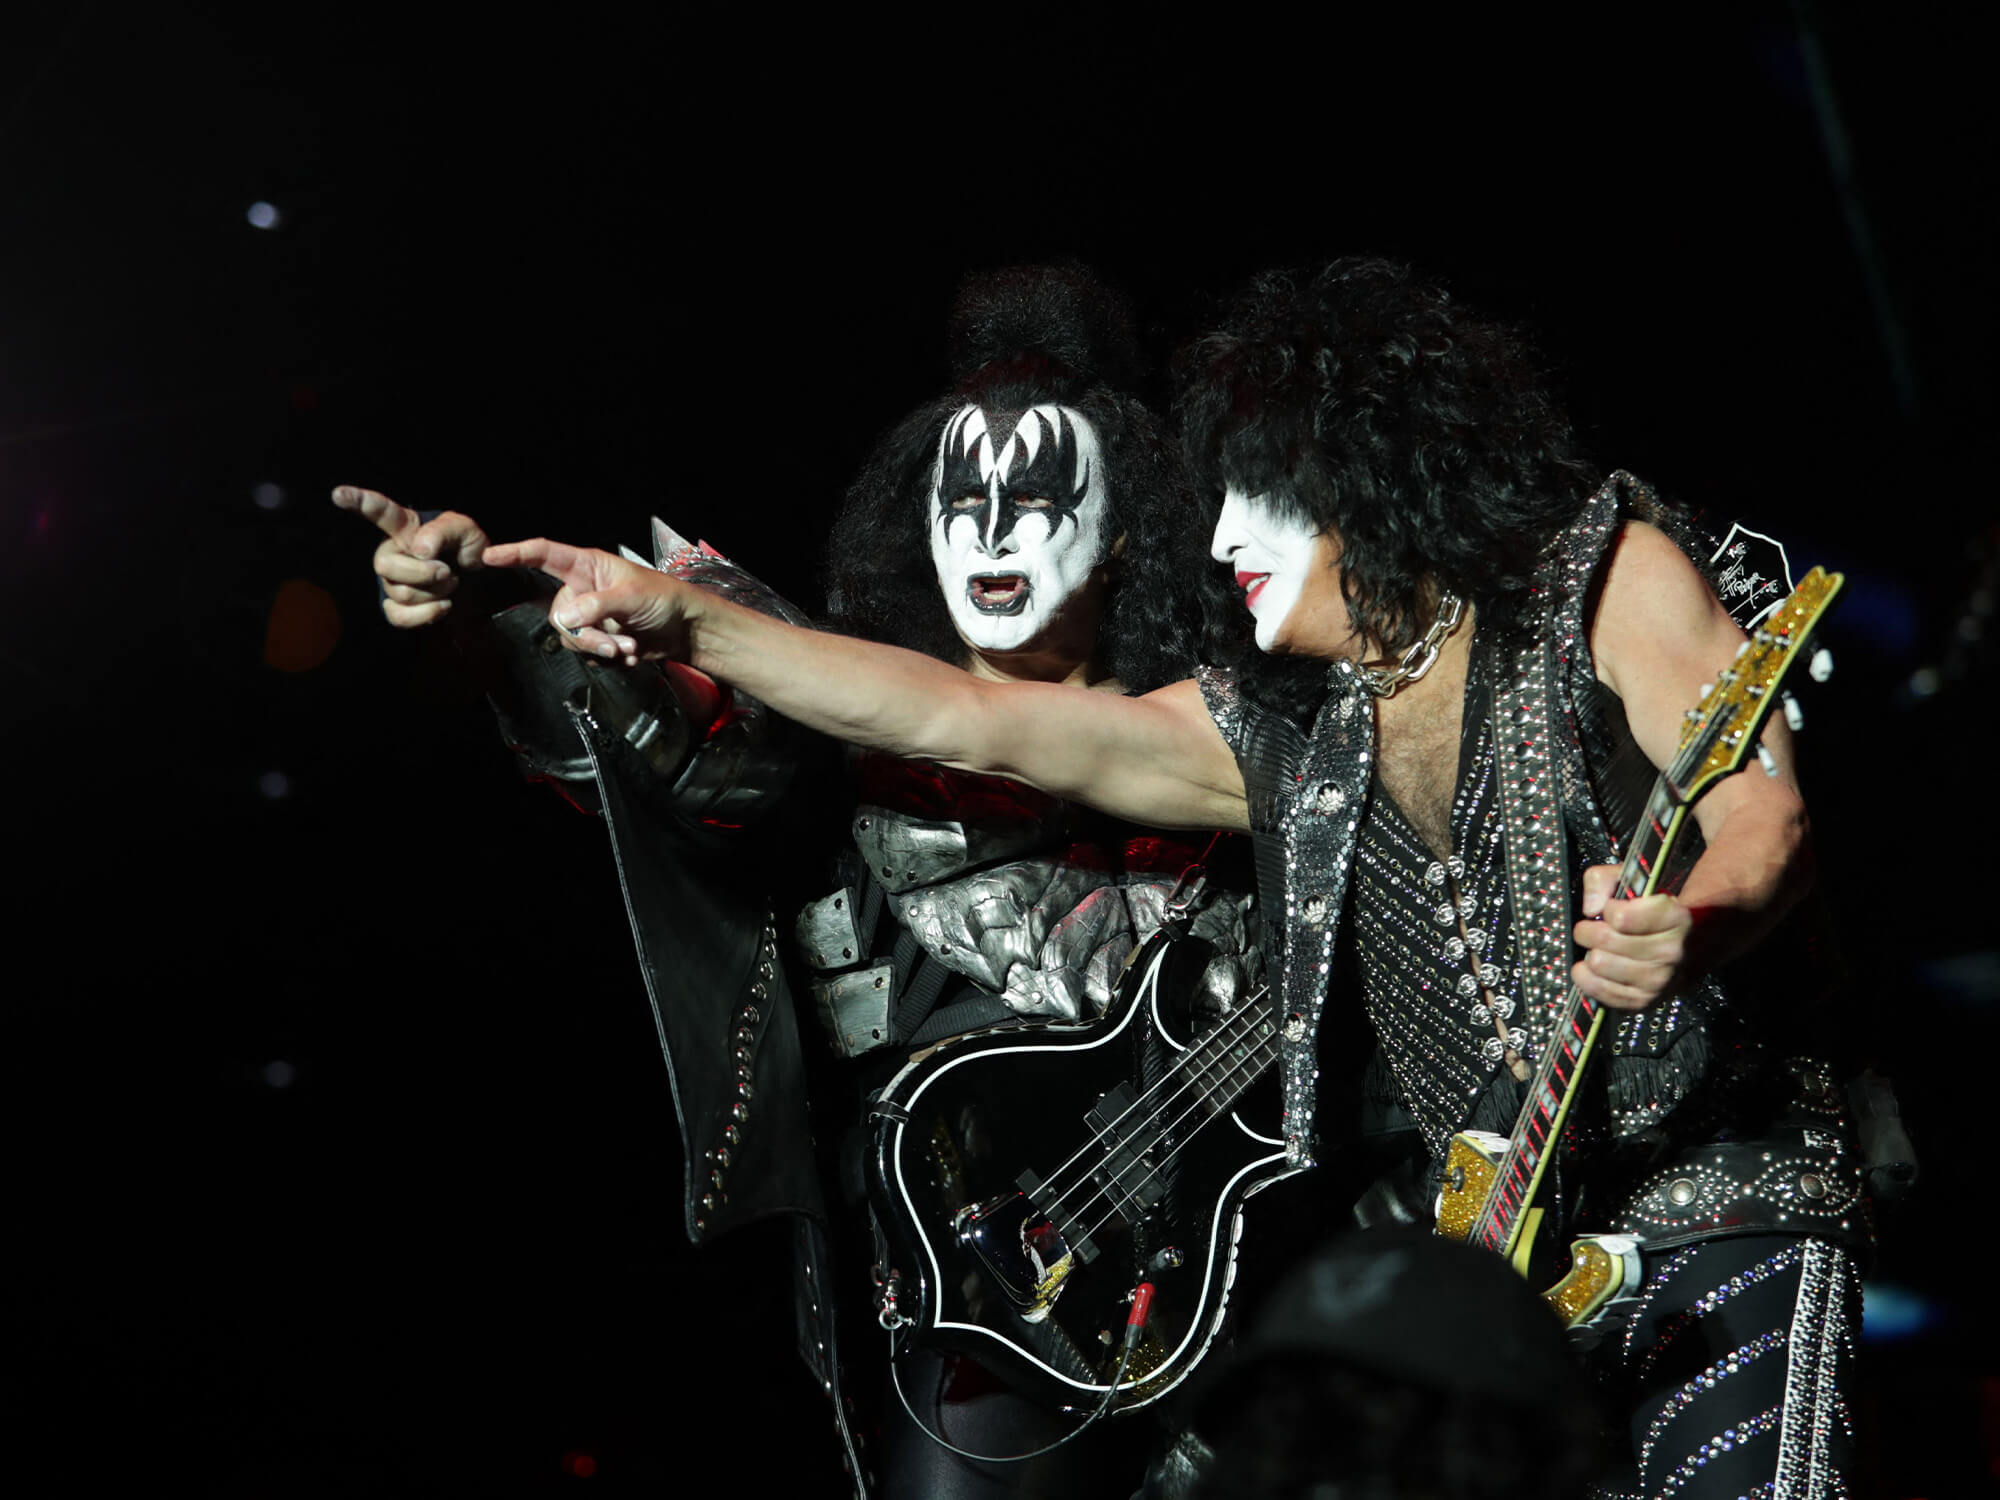 Gene Simmons and Paul Stanley on stage with their guitars in hand. They are wearing their signature stage makeup and are both pointing out into the crowd.